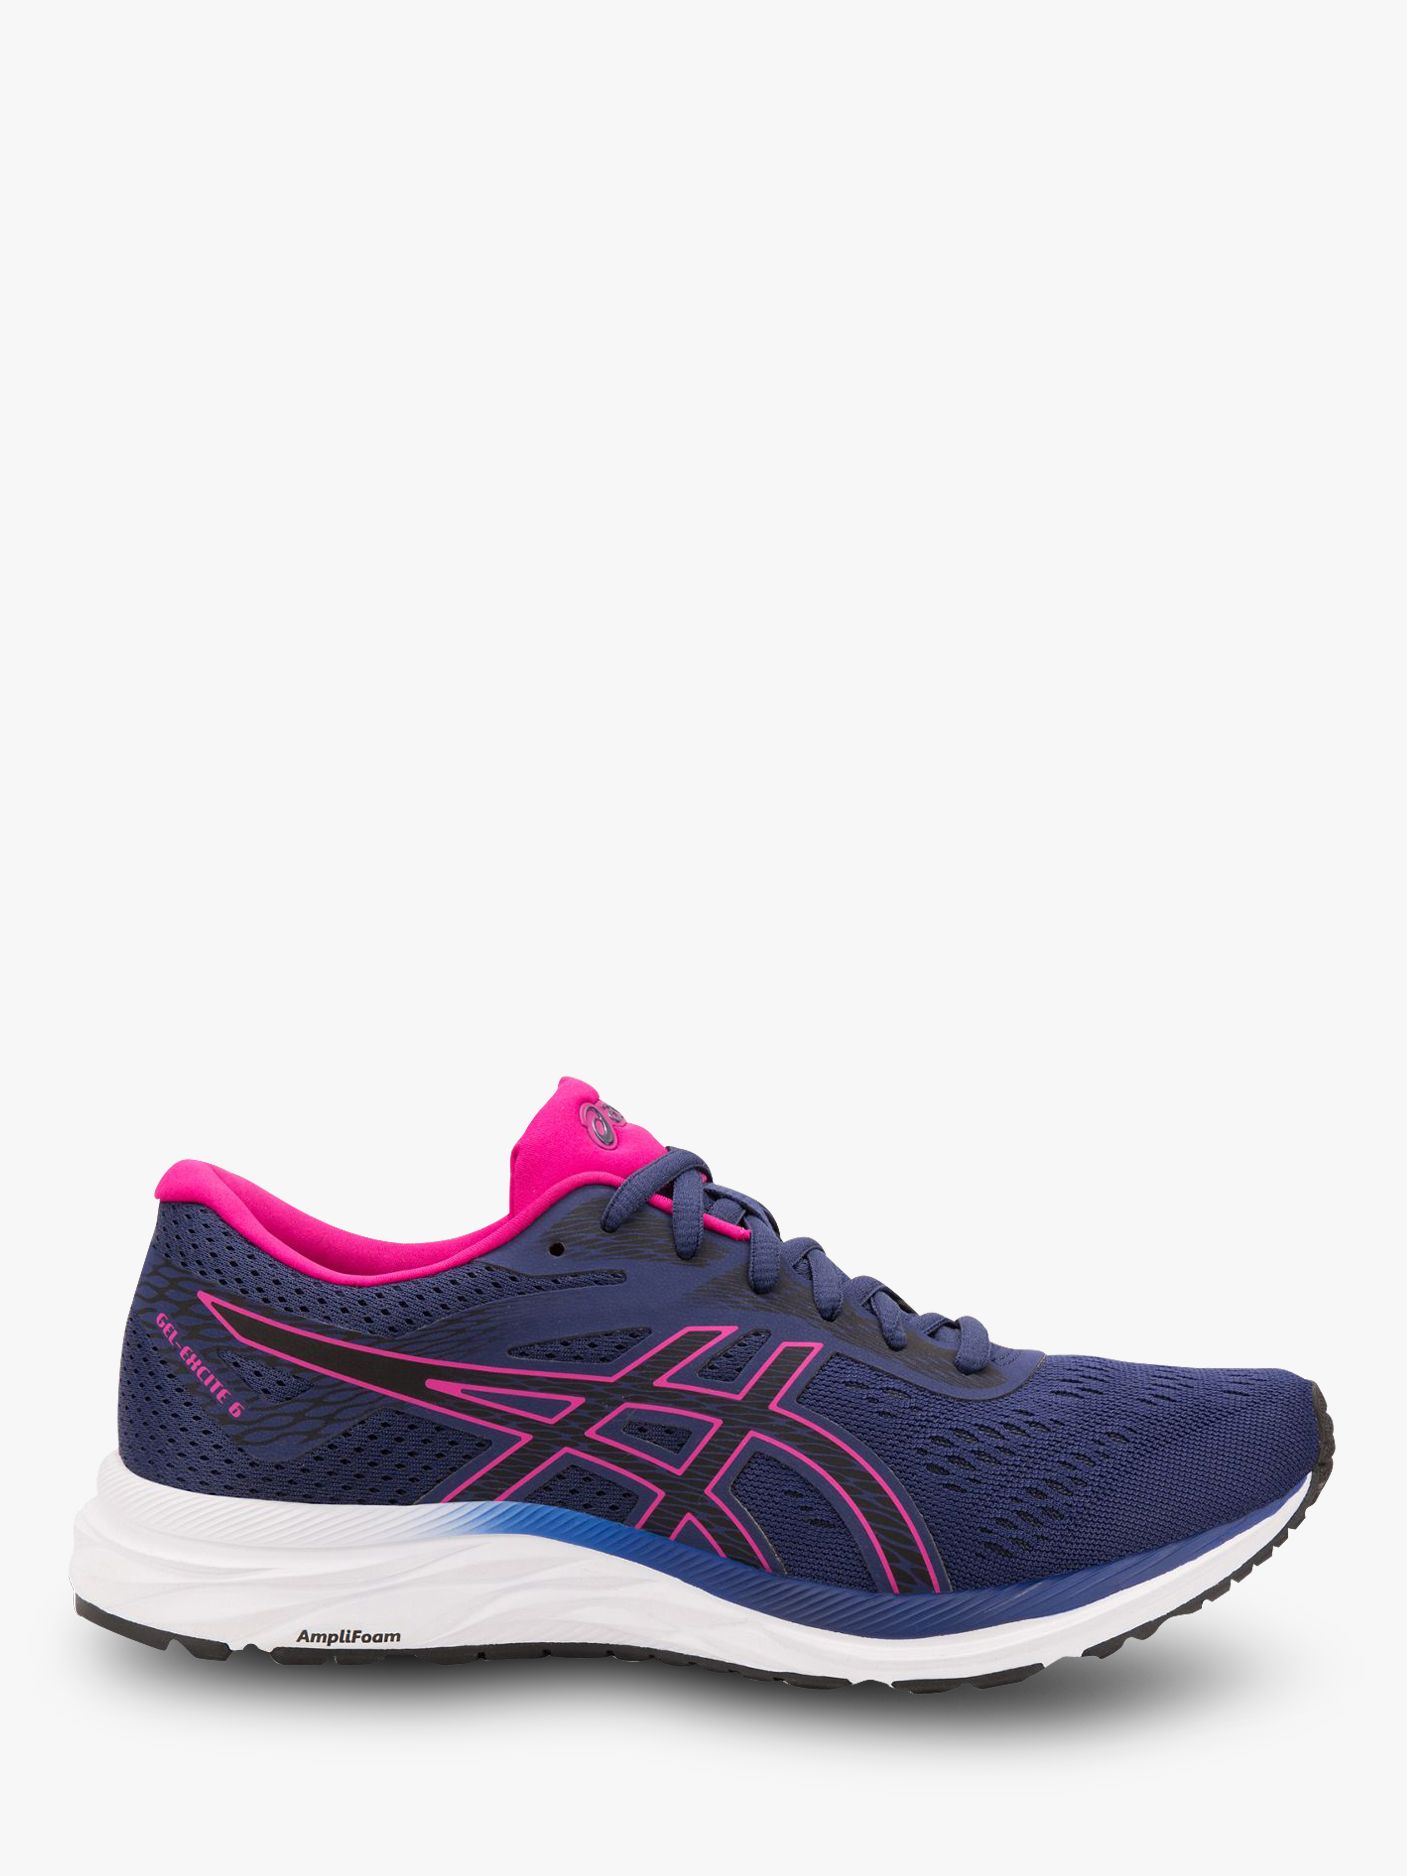 asics women's gel excite 6 running shoes review